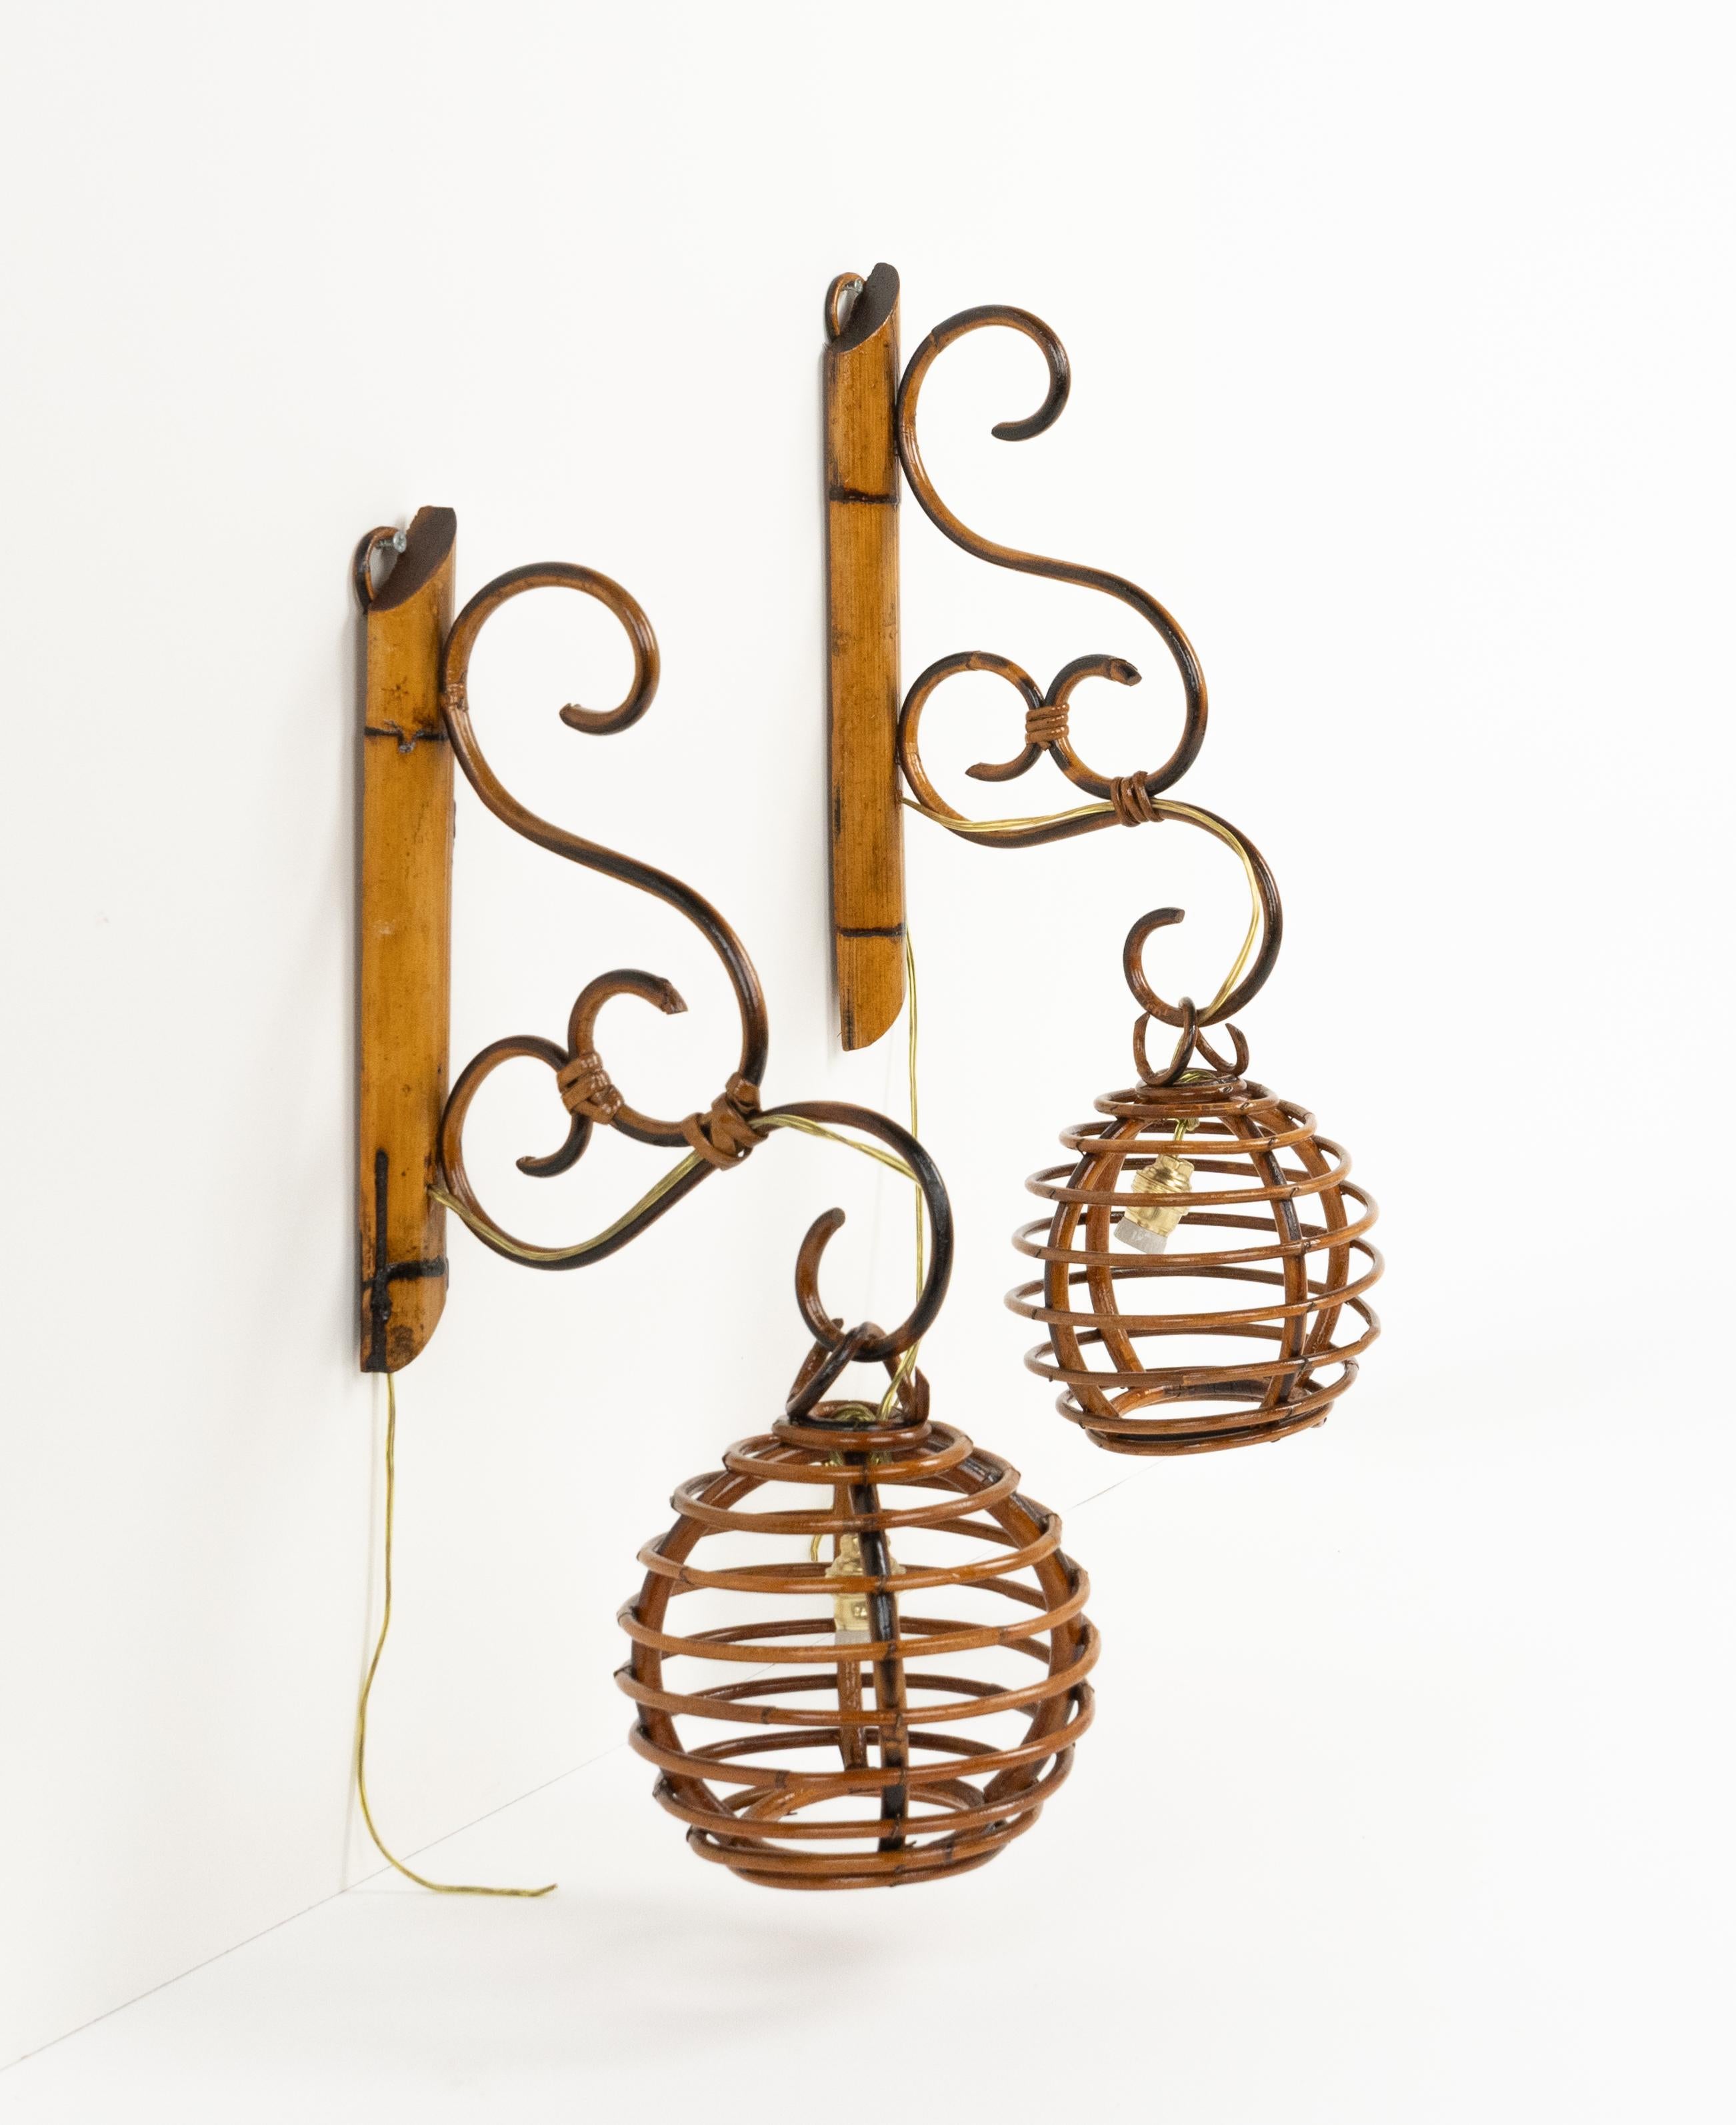 Midcentury Pair of Sconces in Bamboo and Rattan Louis Sognot Style, Italy 1960s For Sale 2